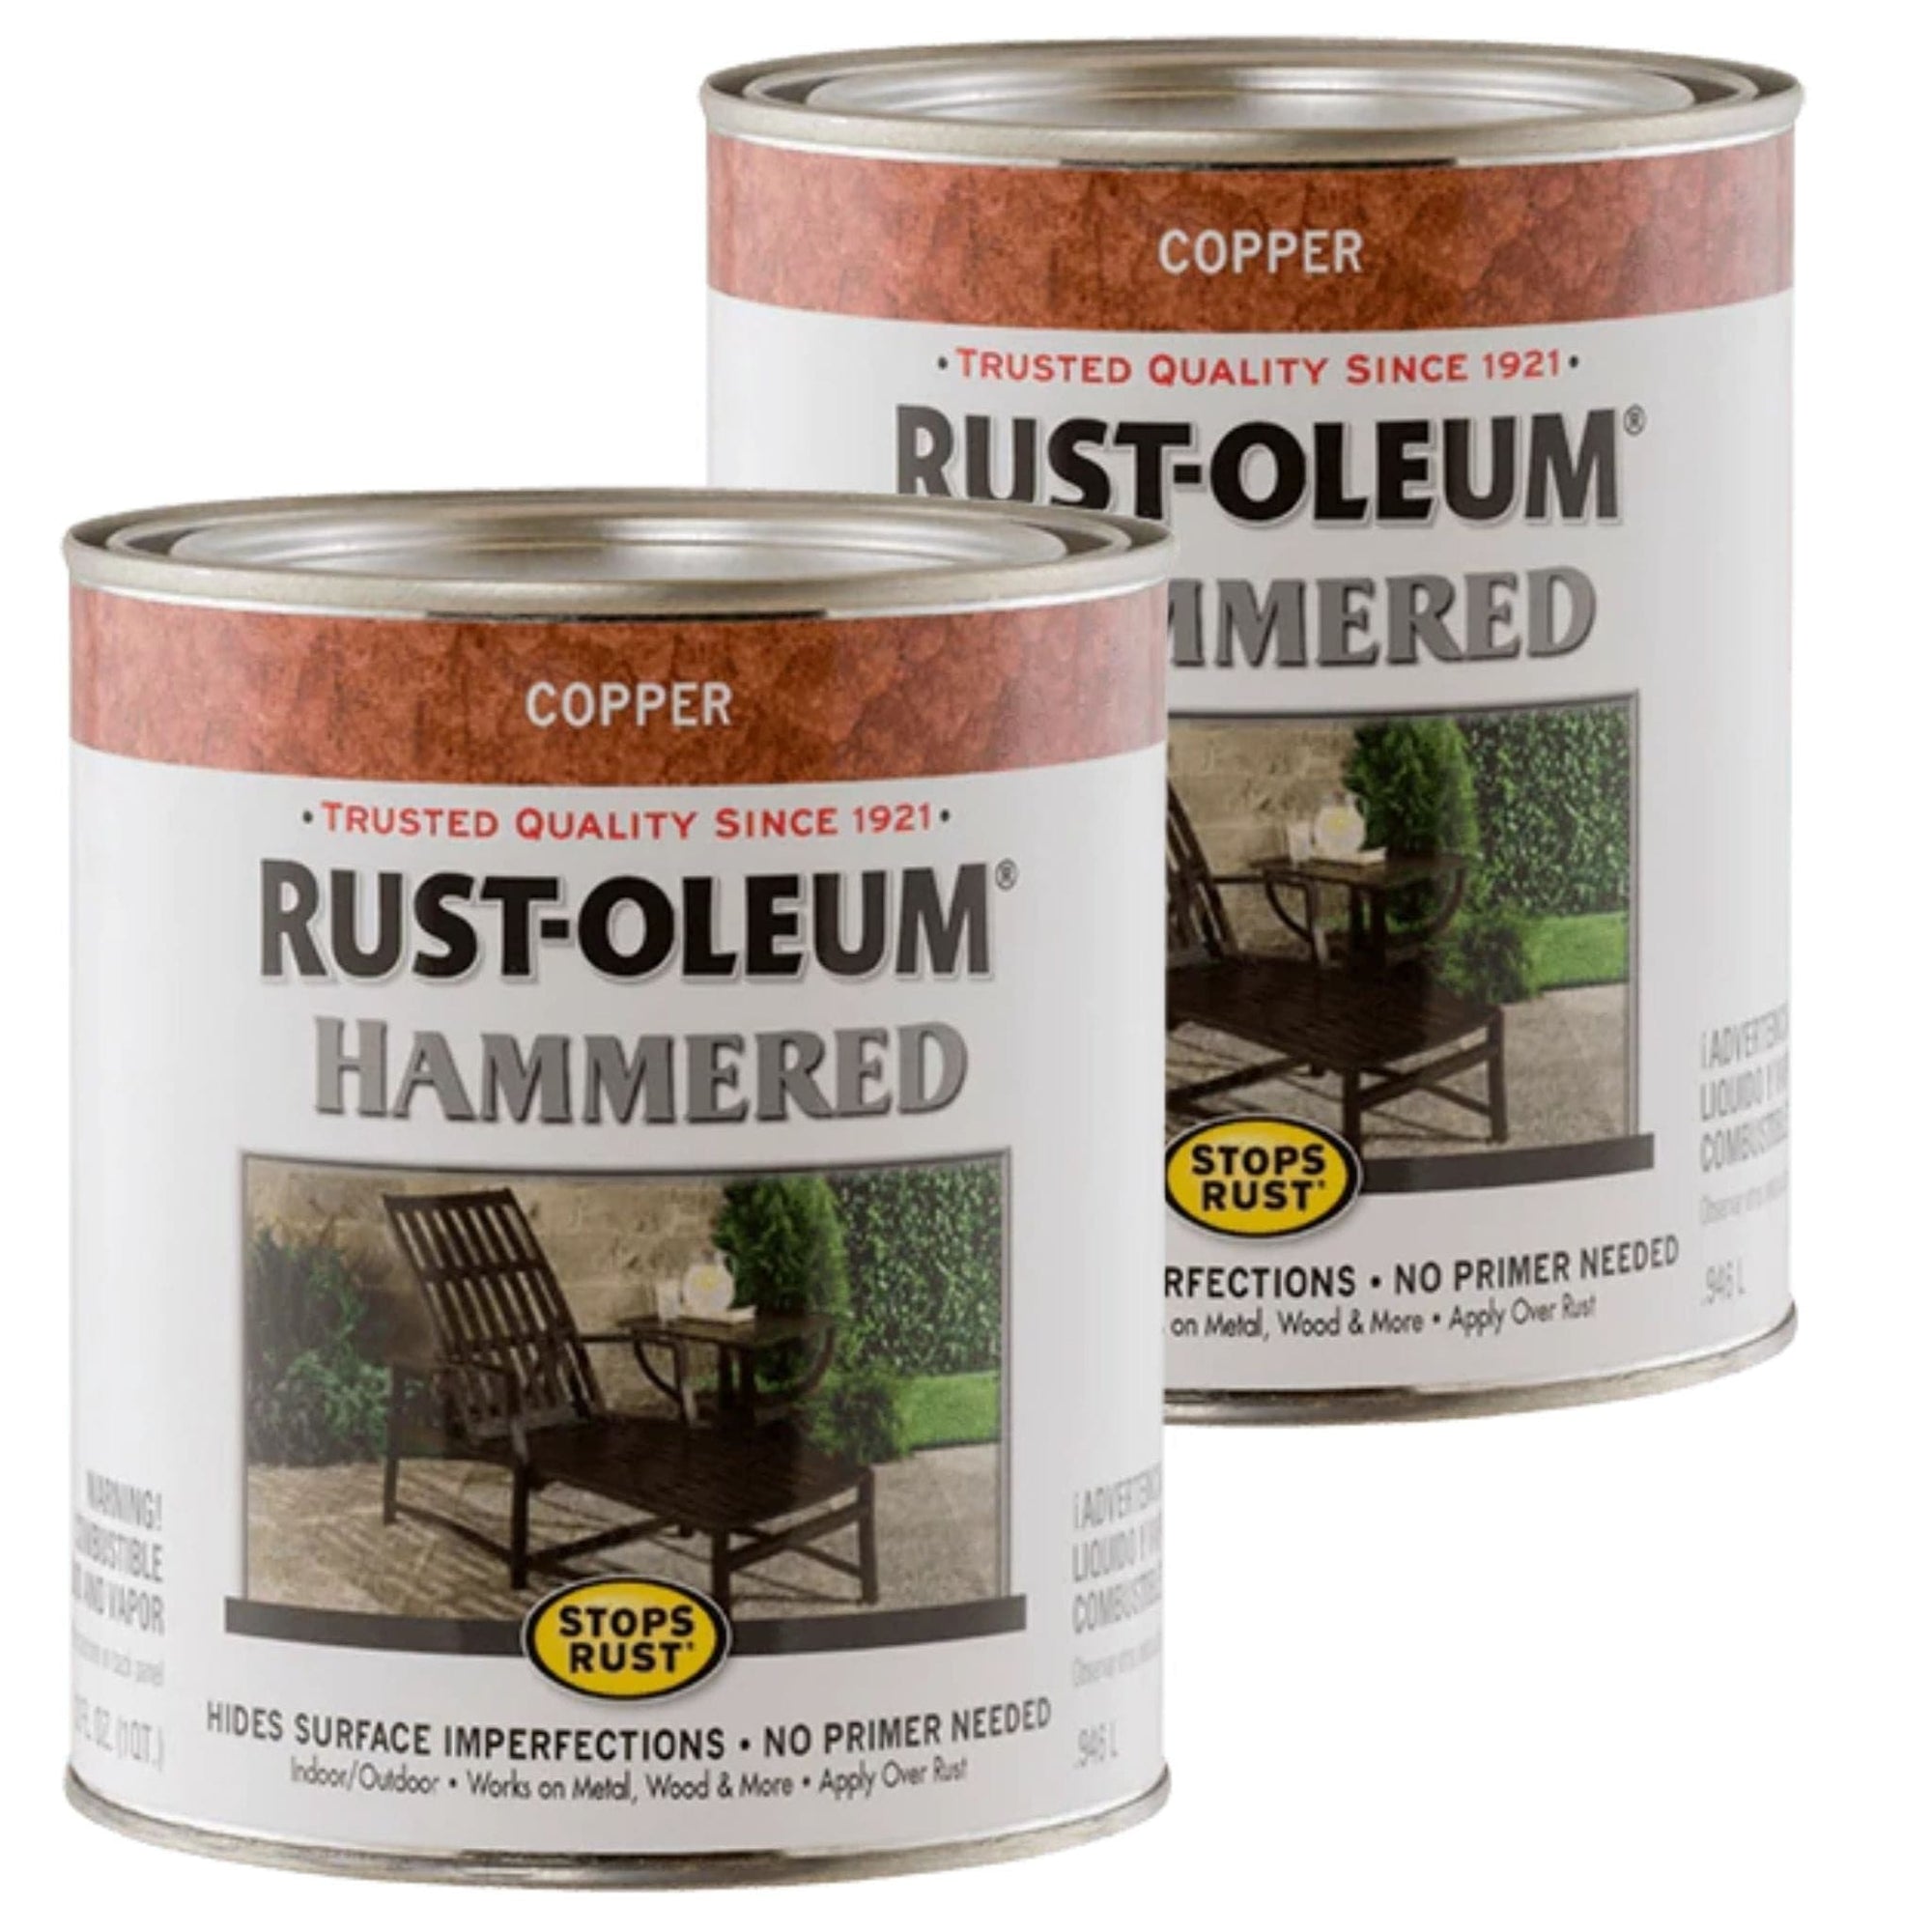 Rustoleum Stops Rust Hammered Paint - 946ml (2 PACK) - Copper - South East Clearance Centre